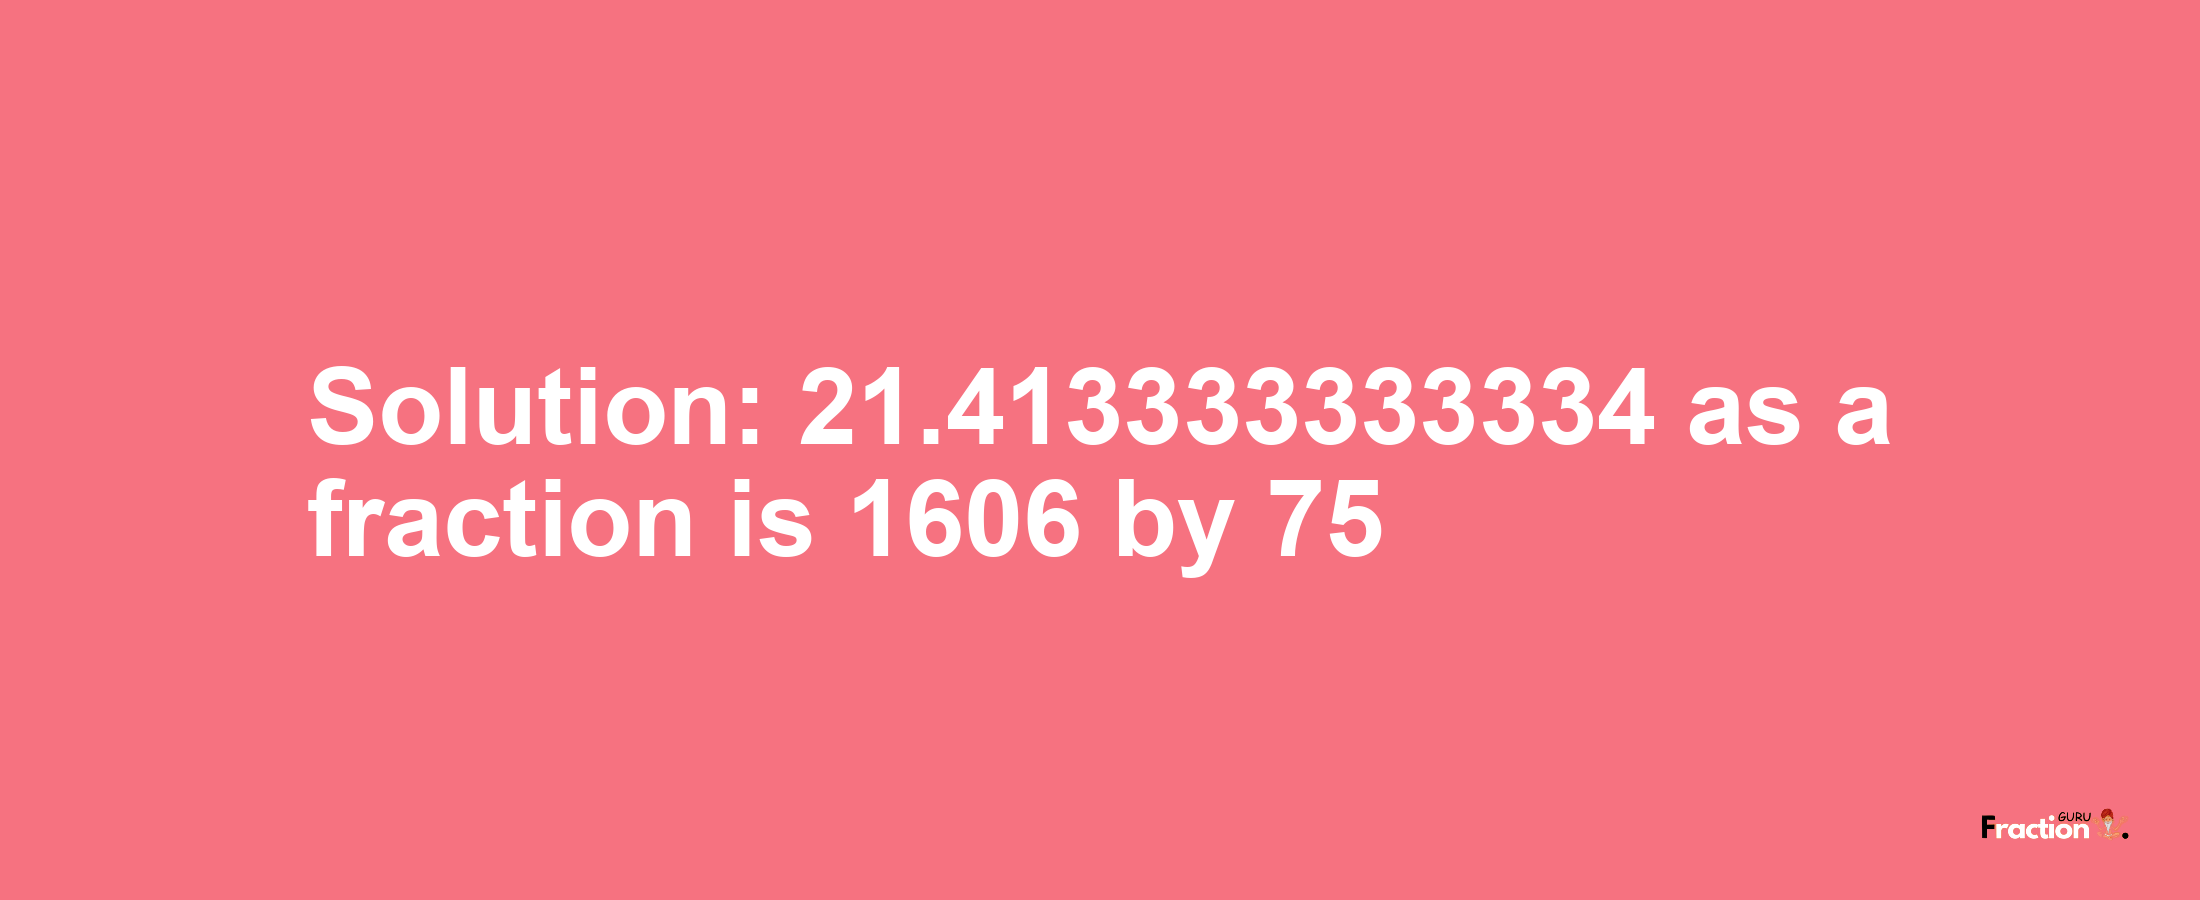 Solution:21.413333333334 as a fraction is 1606/75